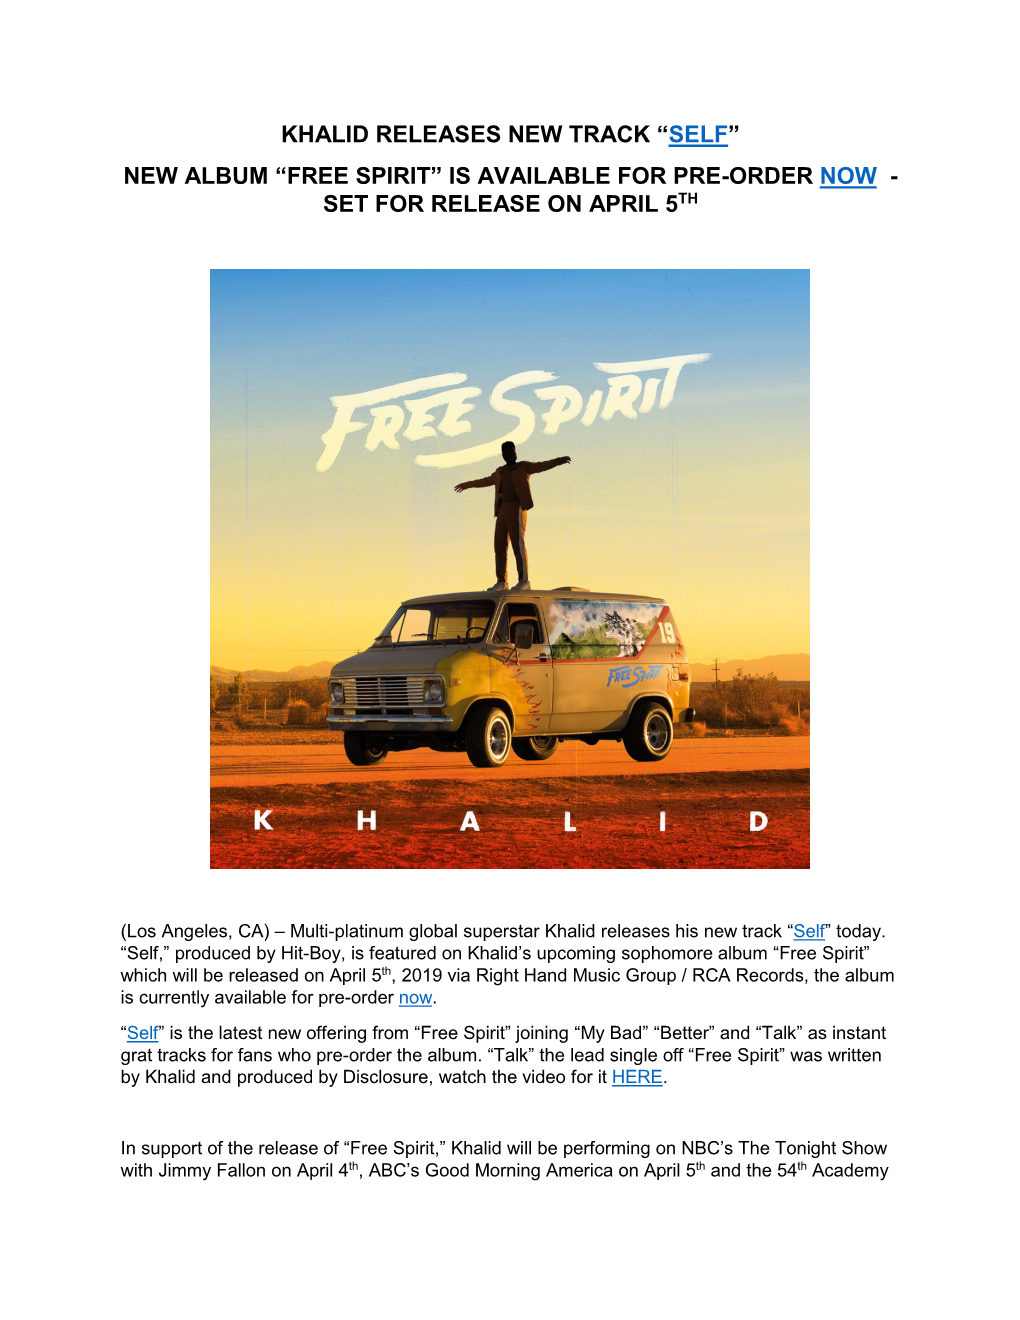 Khalid Releases New Track “Self” New Album “Free Spirit” Is Available for Pre-Order Now - Set for Release on April 5Th